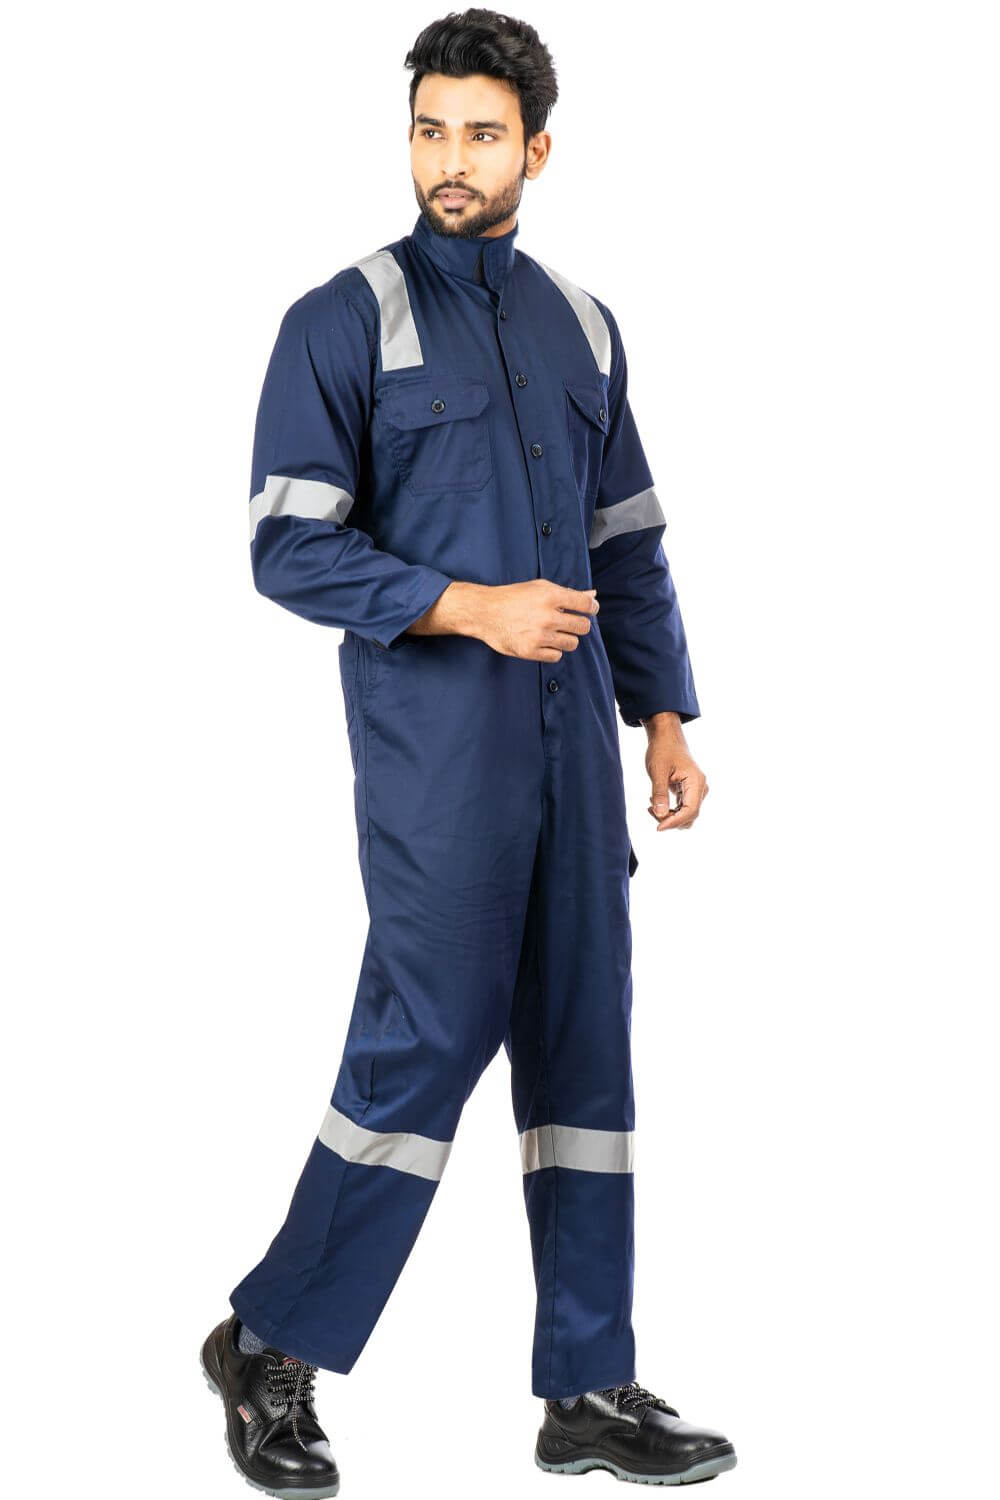 AS/NZS 4602.1:2011 standards compliant light-weight protective coverall for industrial use.